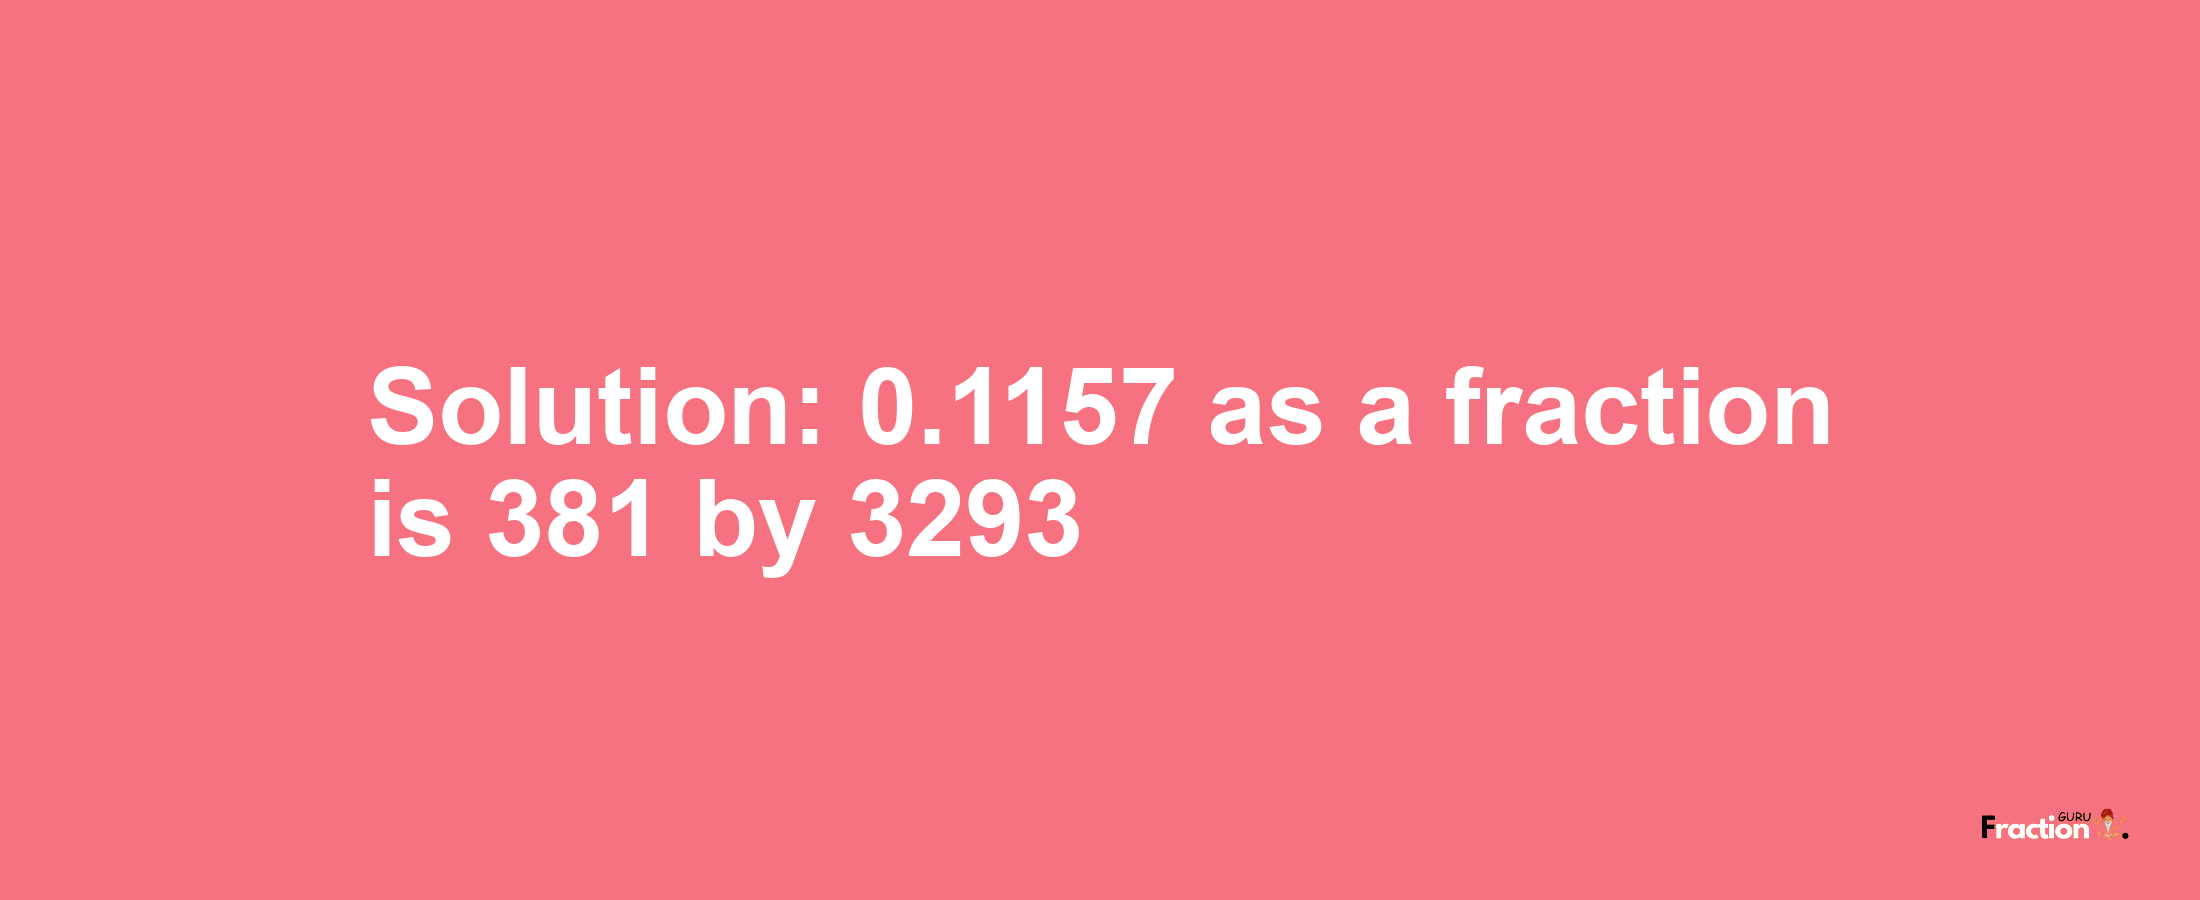 Solution:0.1157 as a fraction is 381/3293